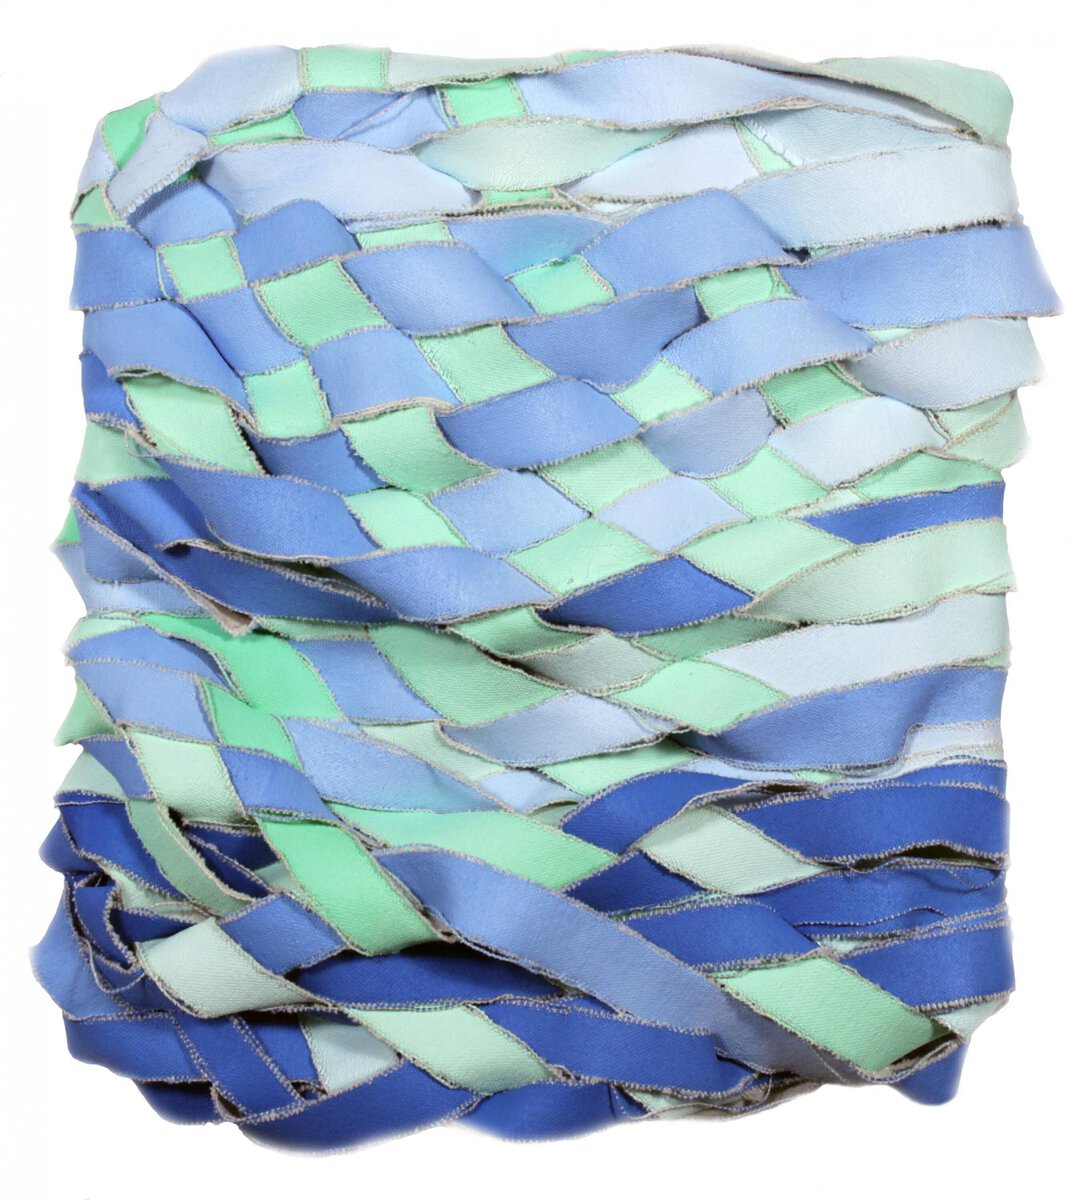 Jean Alexander Frater; Green to Blue Weave; 2016